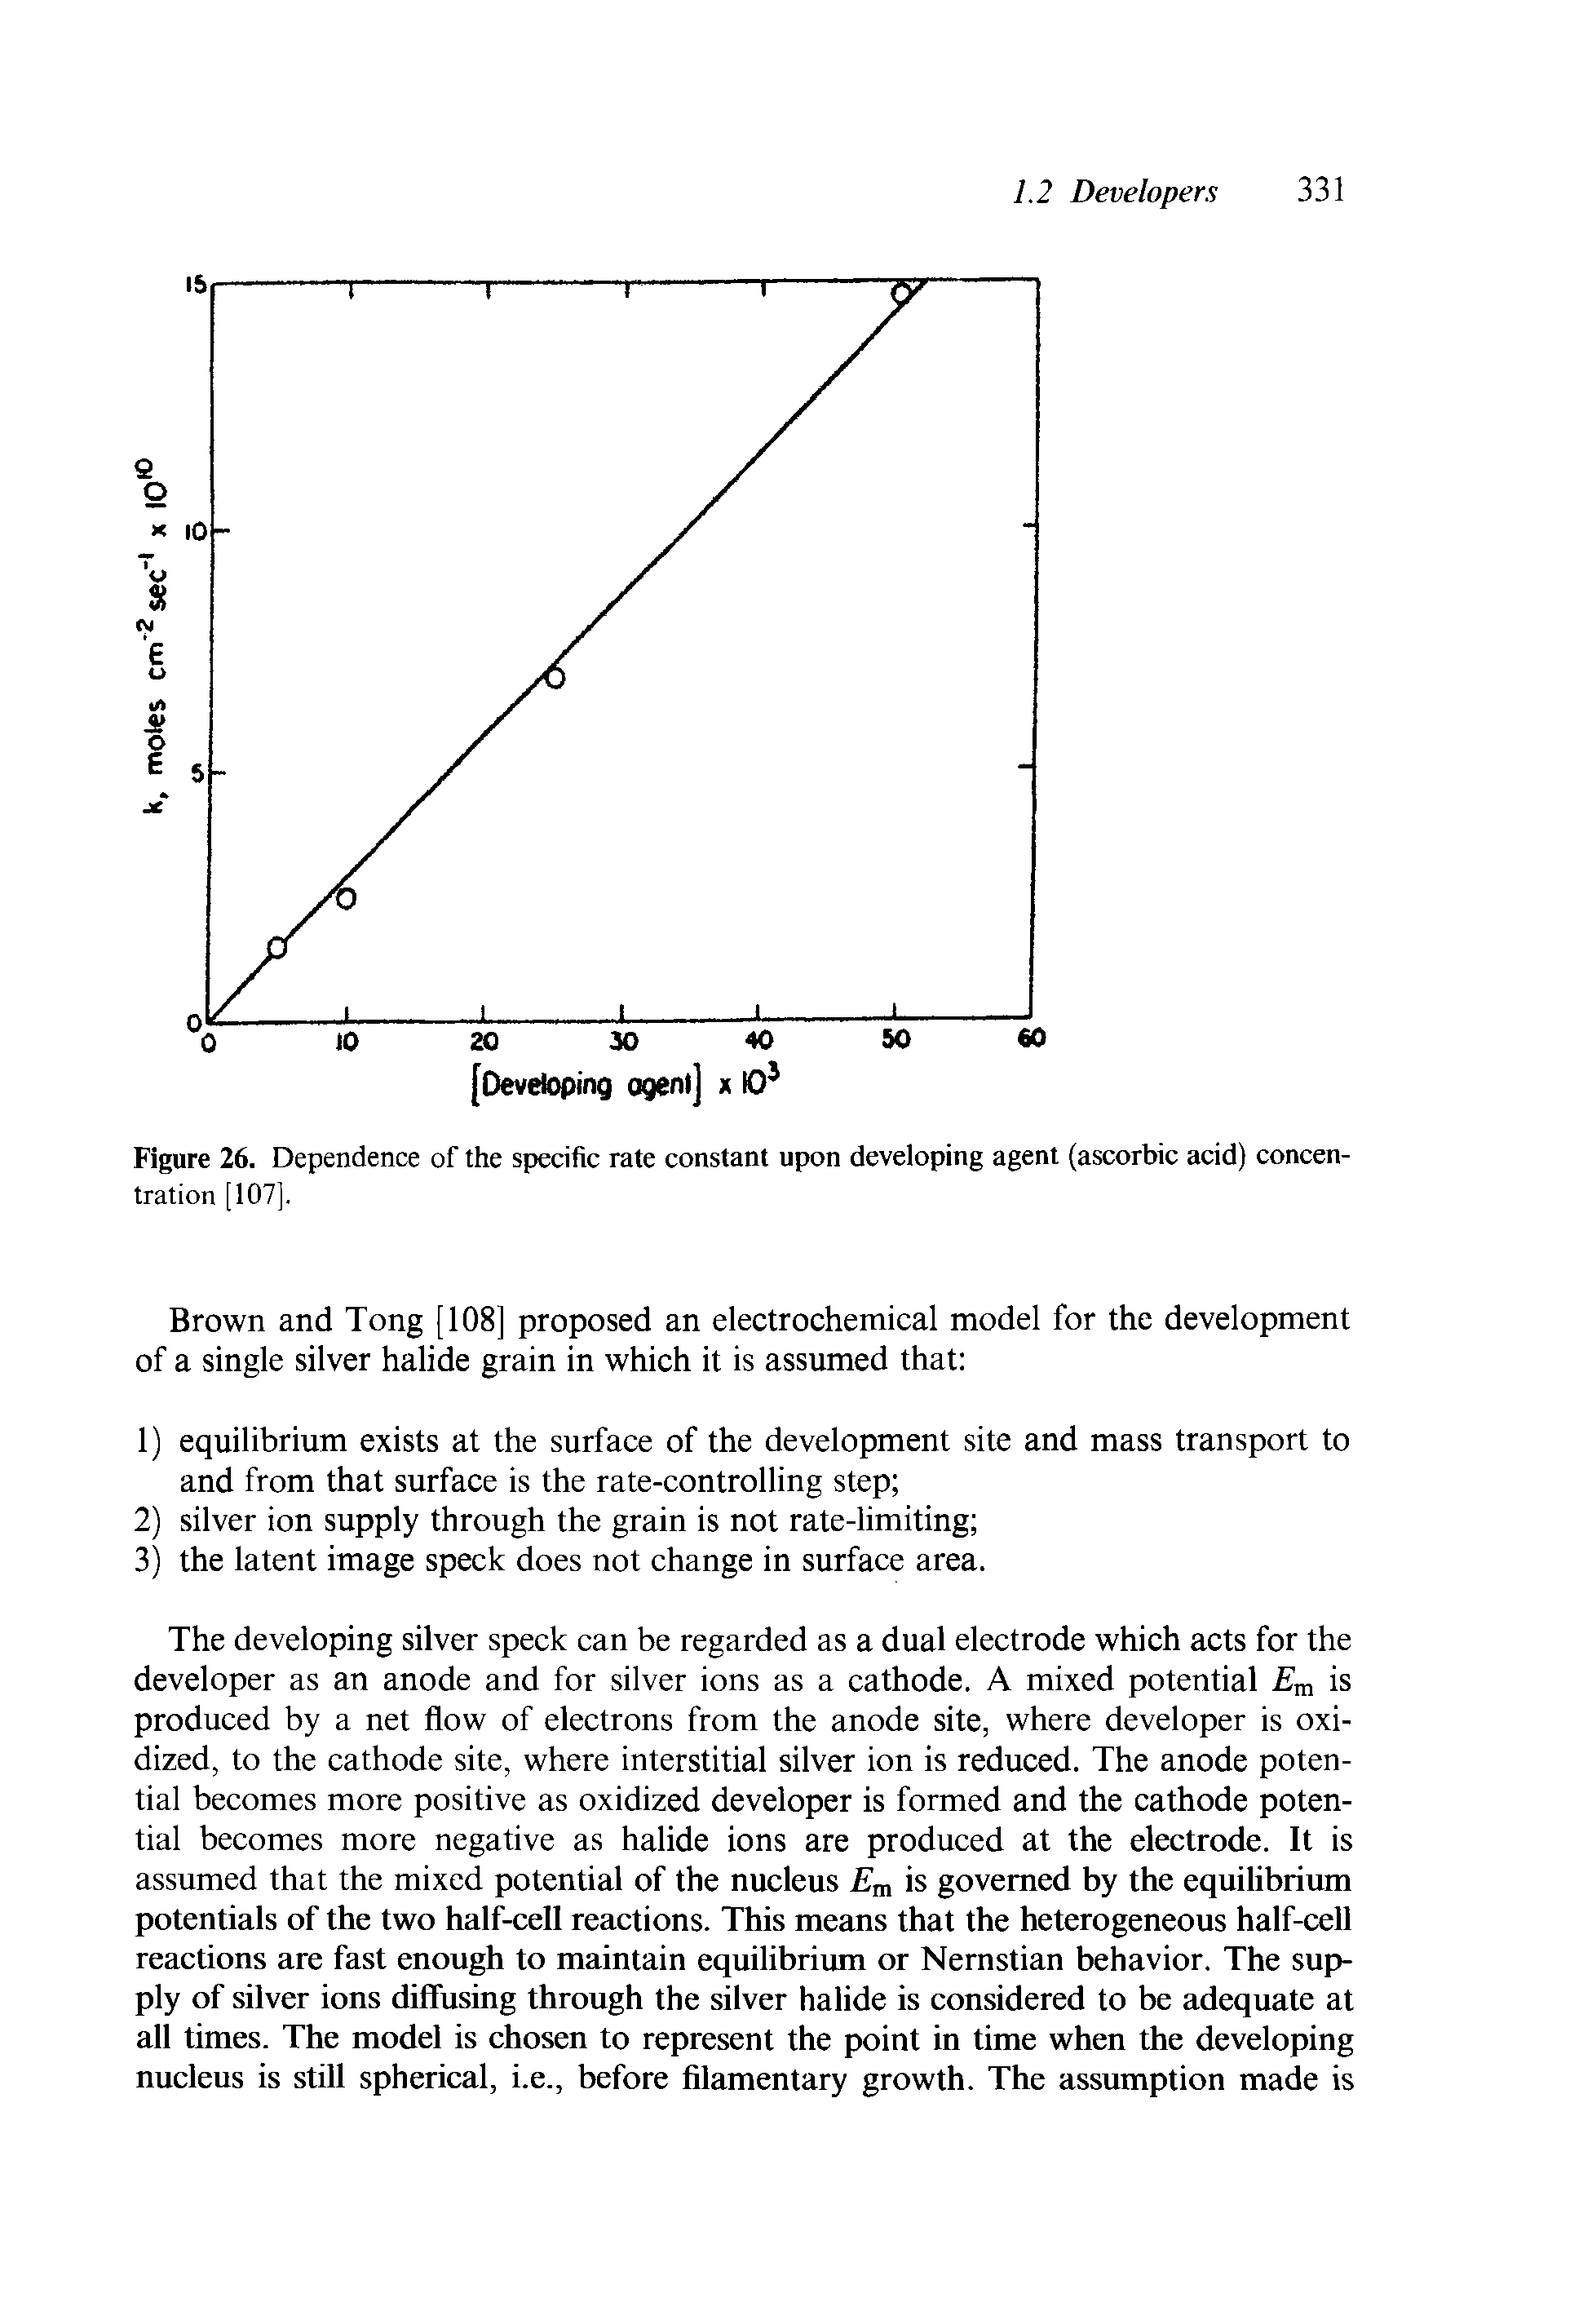 Figure 26. Dependence of the specific rate constant upon developing agent (ascorbic acid) concentration [107].